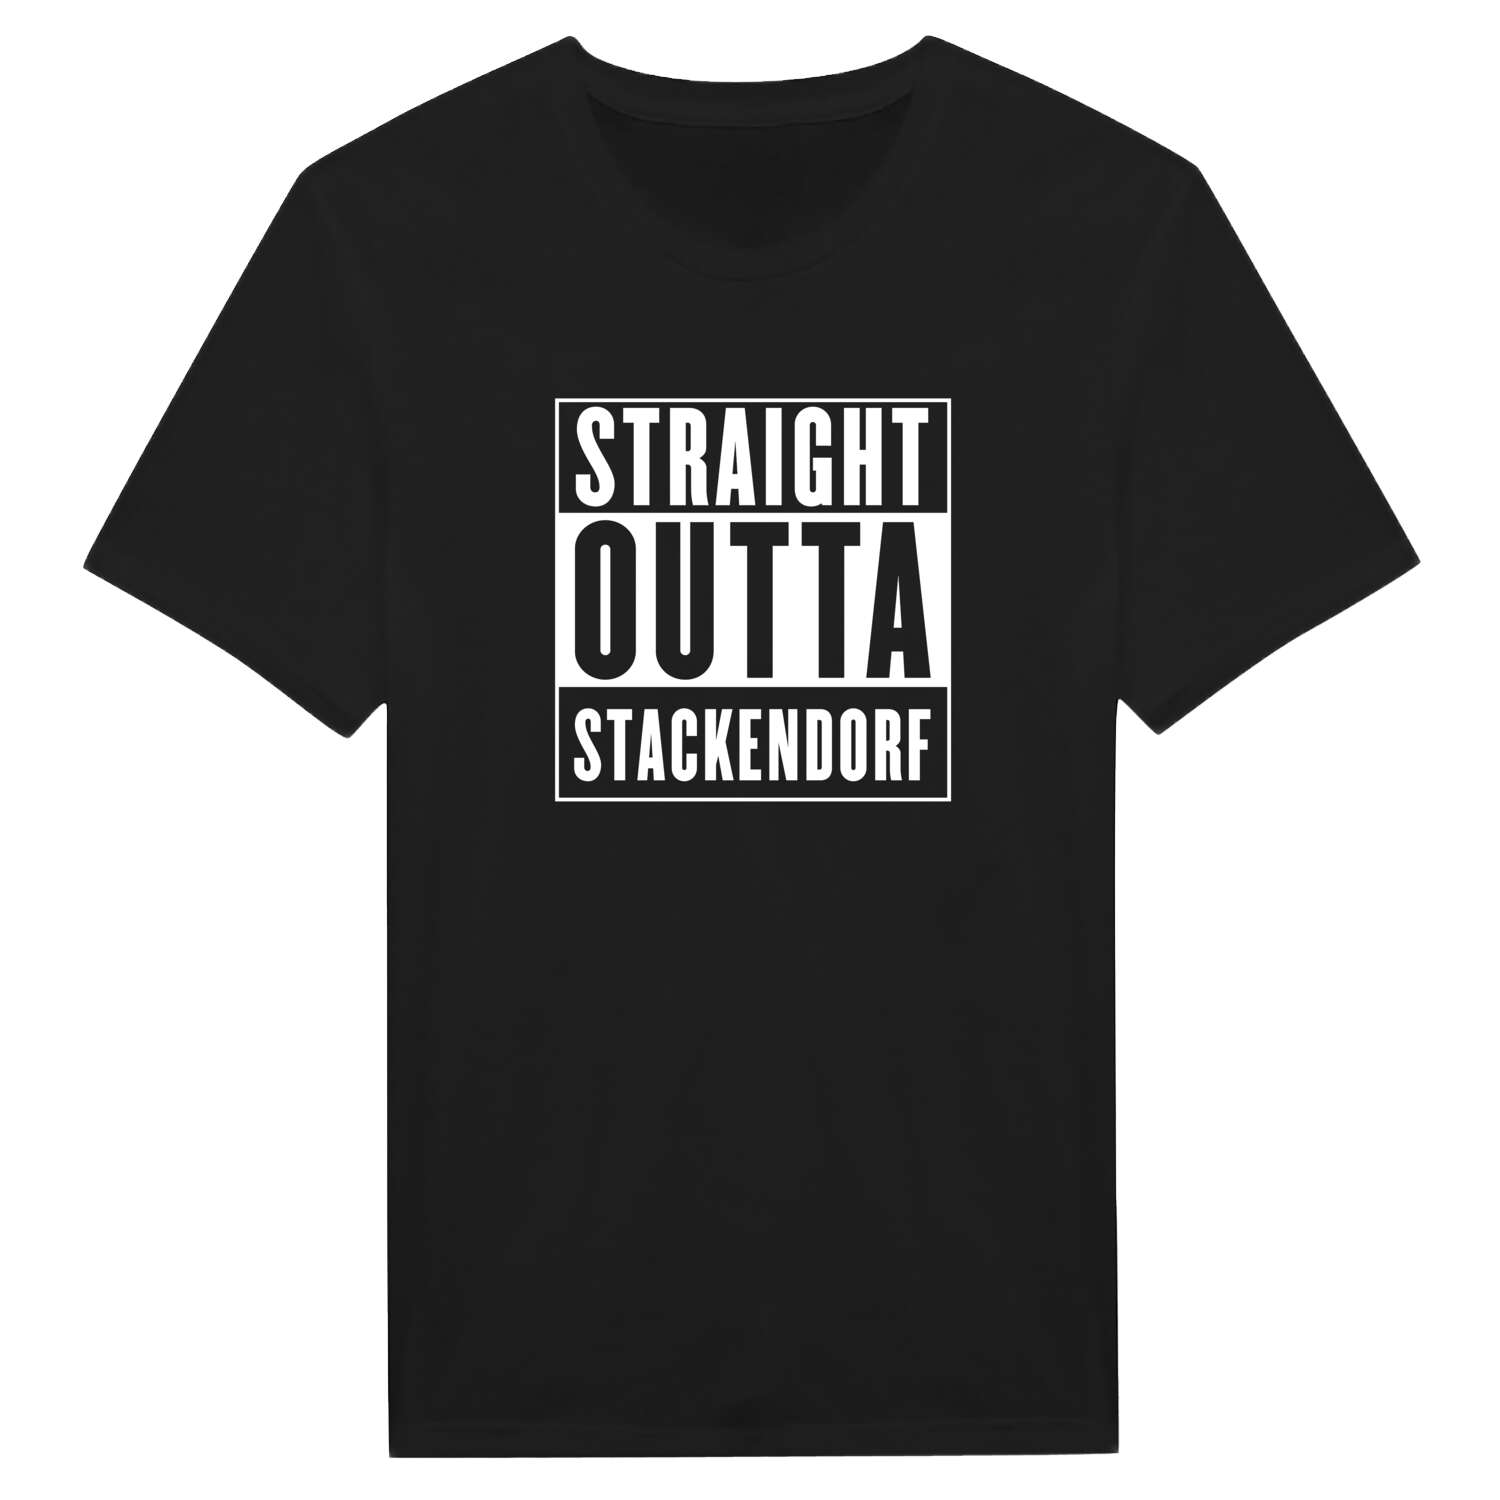 Stackendorf T-Shirt »Straight Outta«